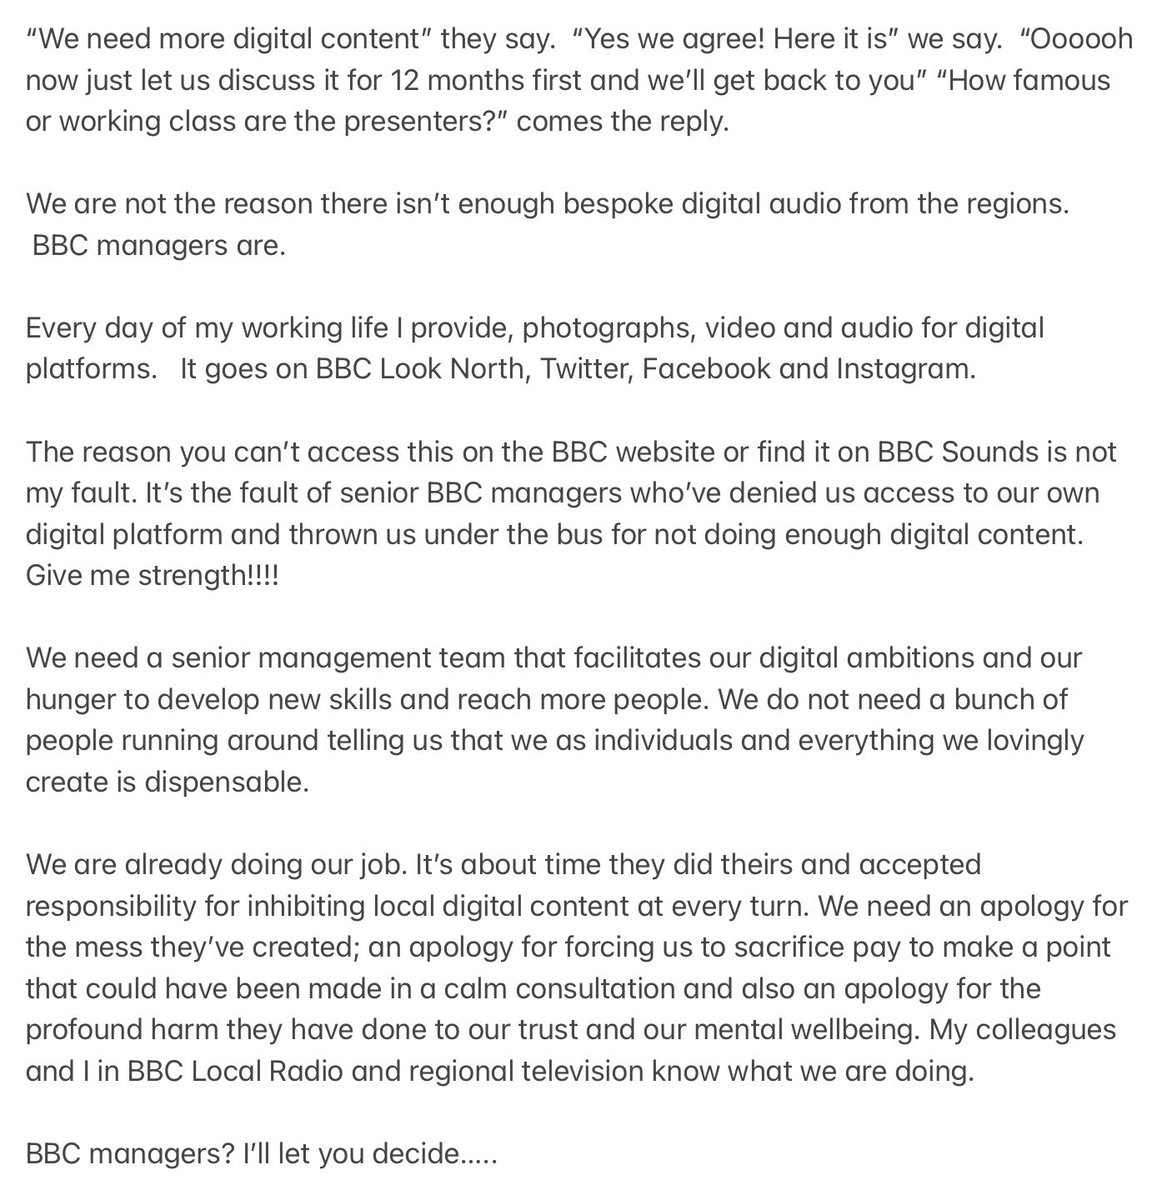 I am not the reason there’s not enough local digital content on the BBC. 

BBC senior management is 👇🏻

#NUJBBCStrike #KeepBBCLocalRadioLocal